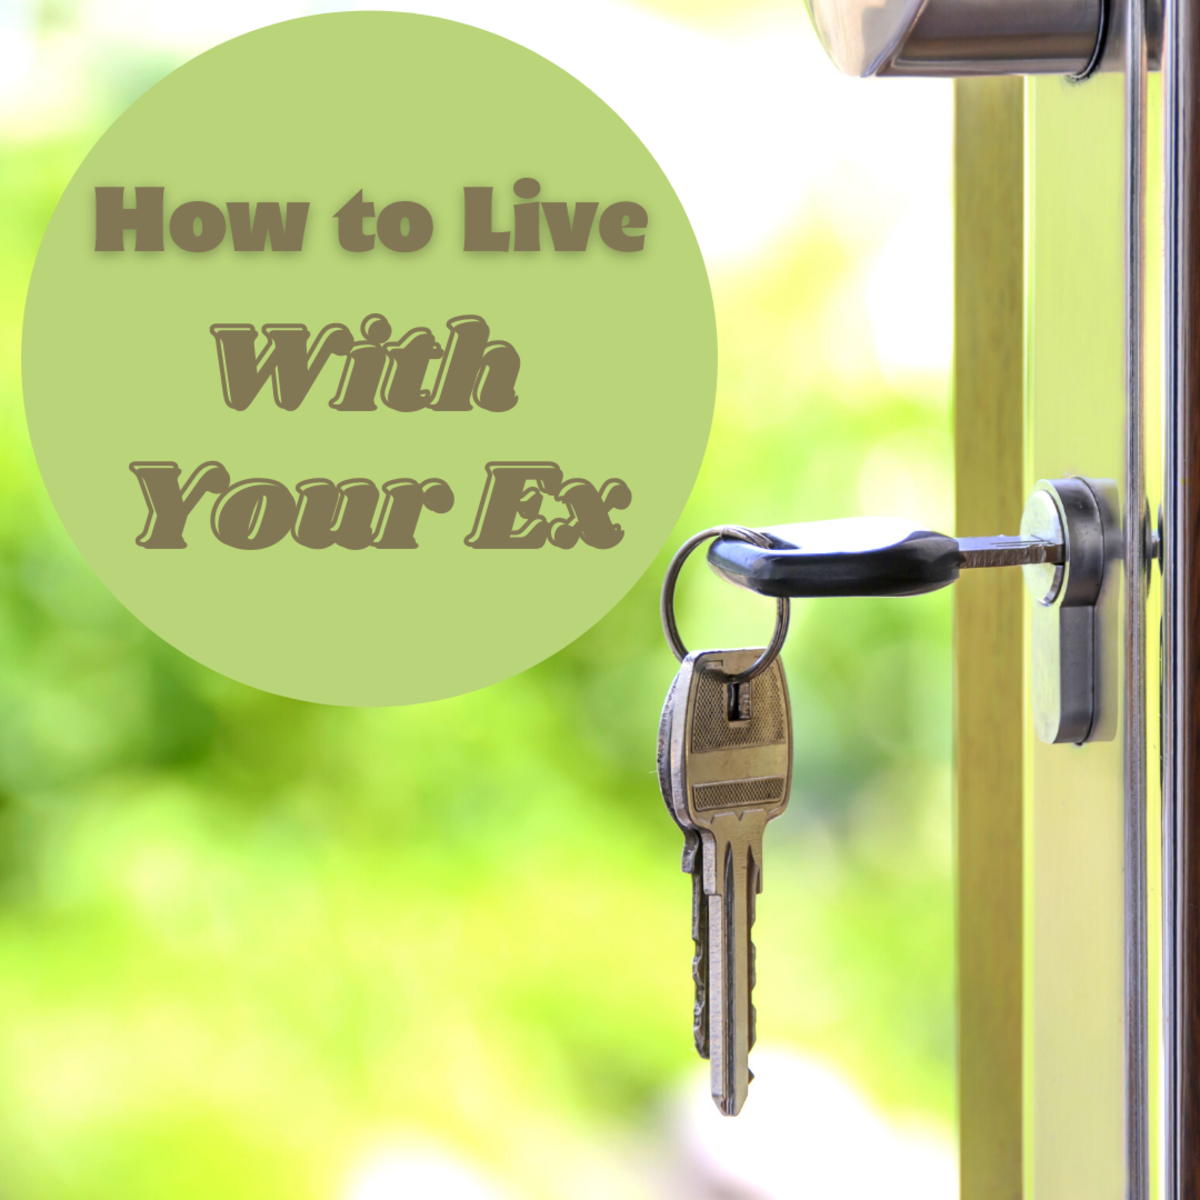 How to Live With Your Ex After Breaking Up